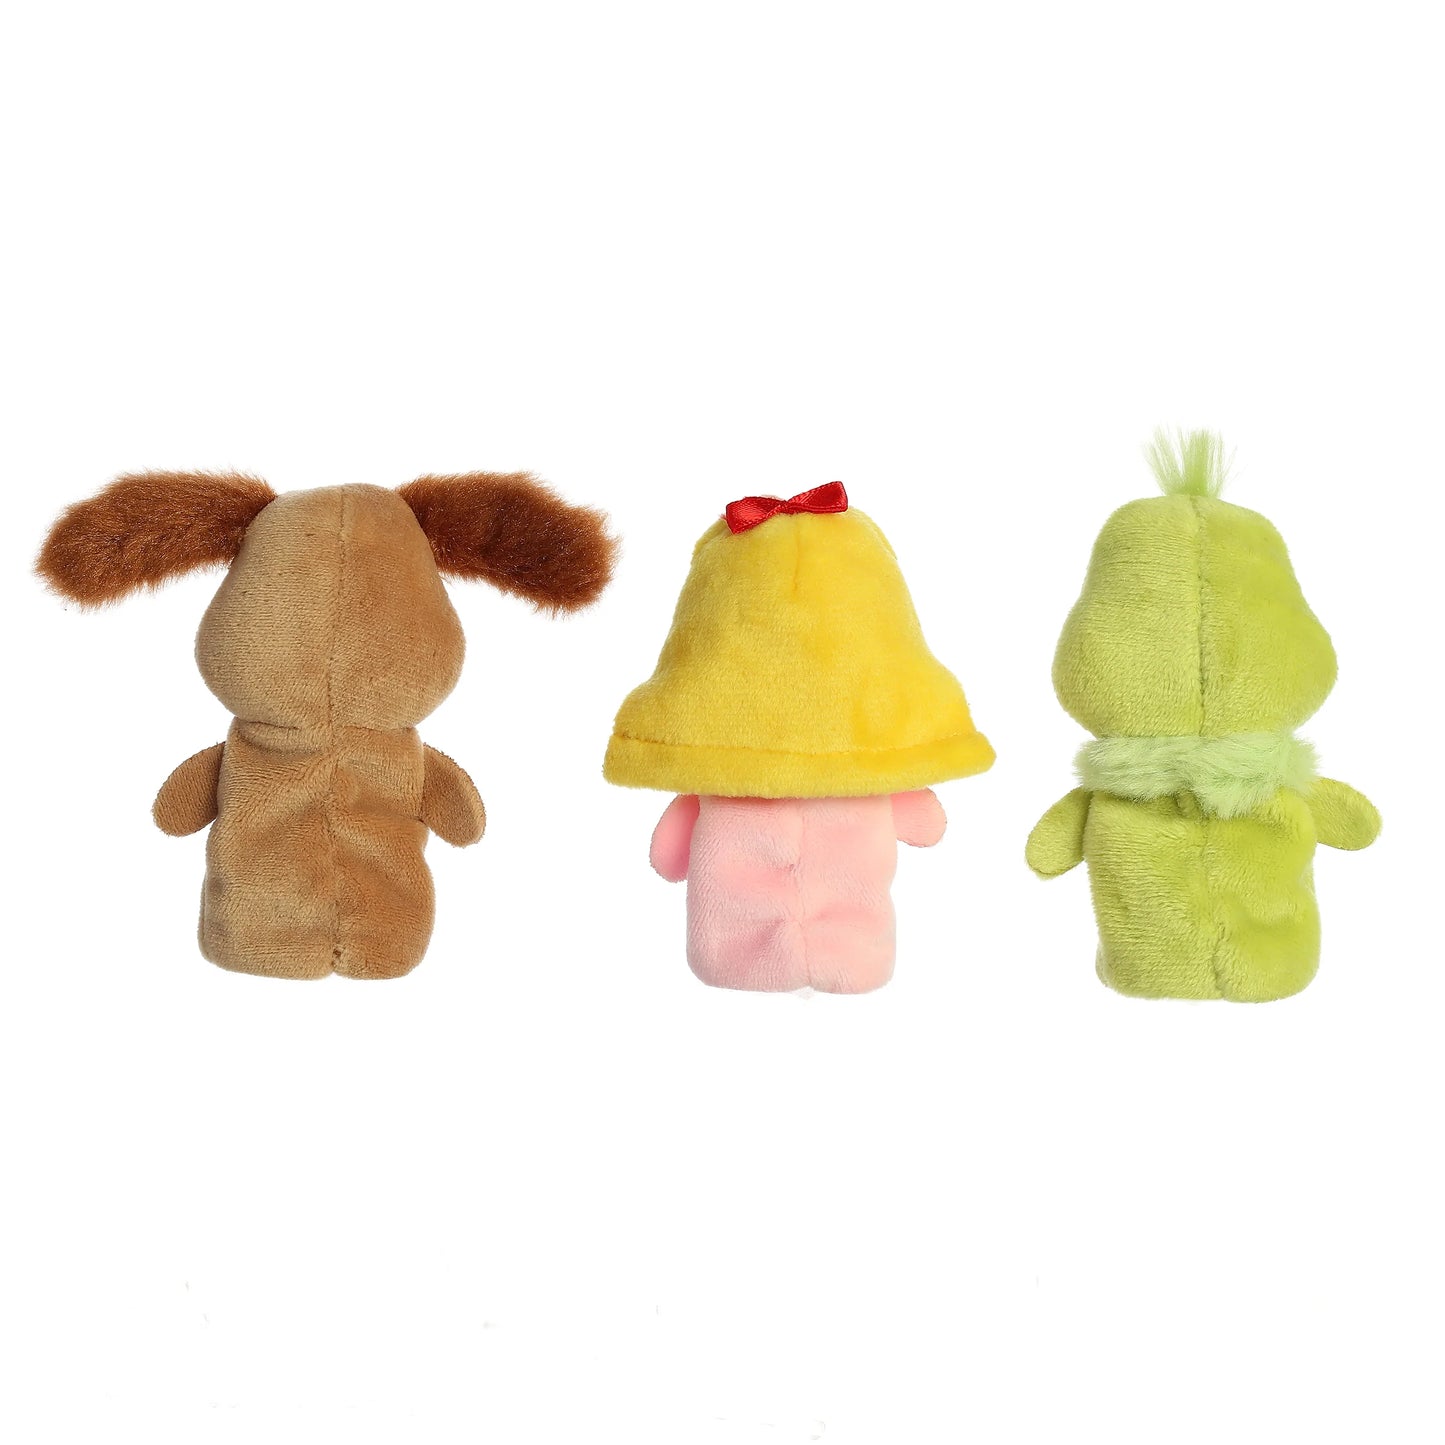 Finger Puppets - The Grinch - Set of 3